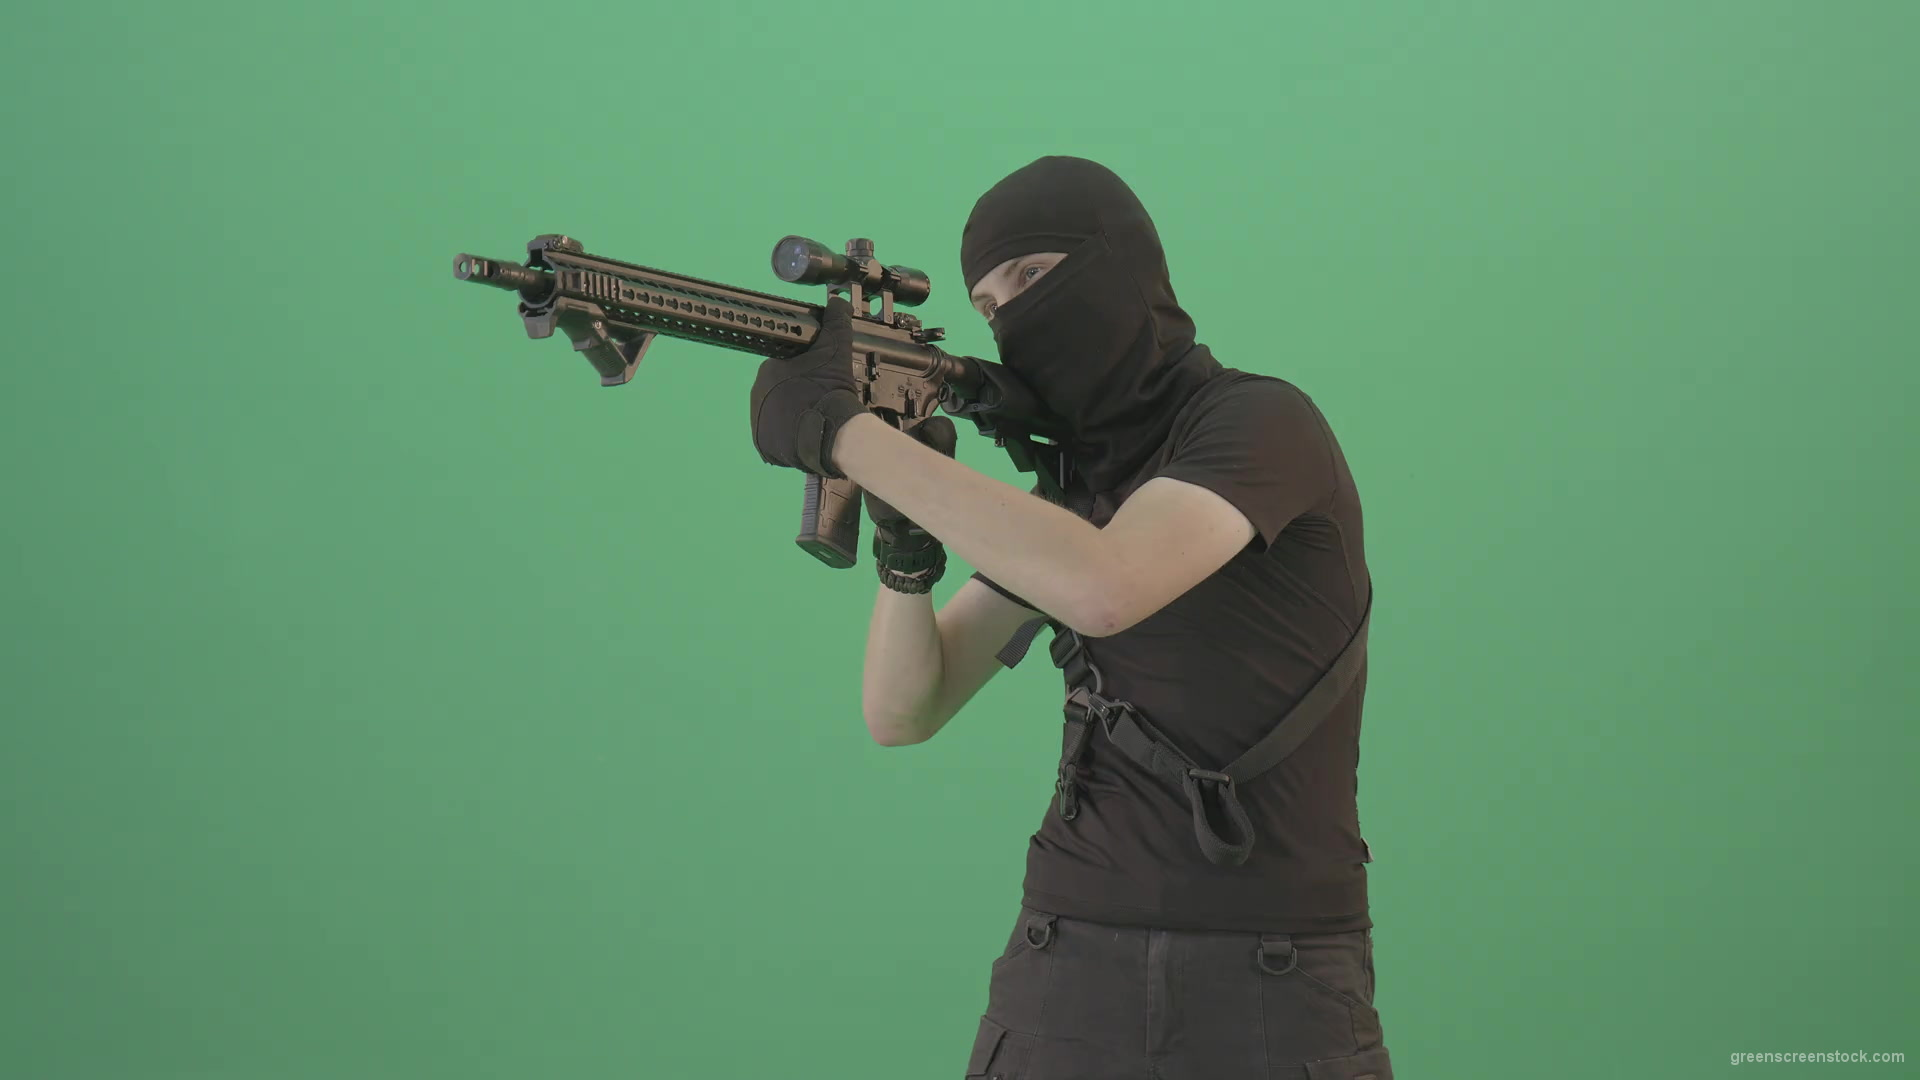 Soldier-in-black-mask-shooting-enemies-with-military-gun-on-green-screen-4K-Video-Footage-1920_001 Green Screen Stock